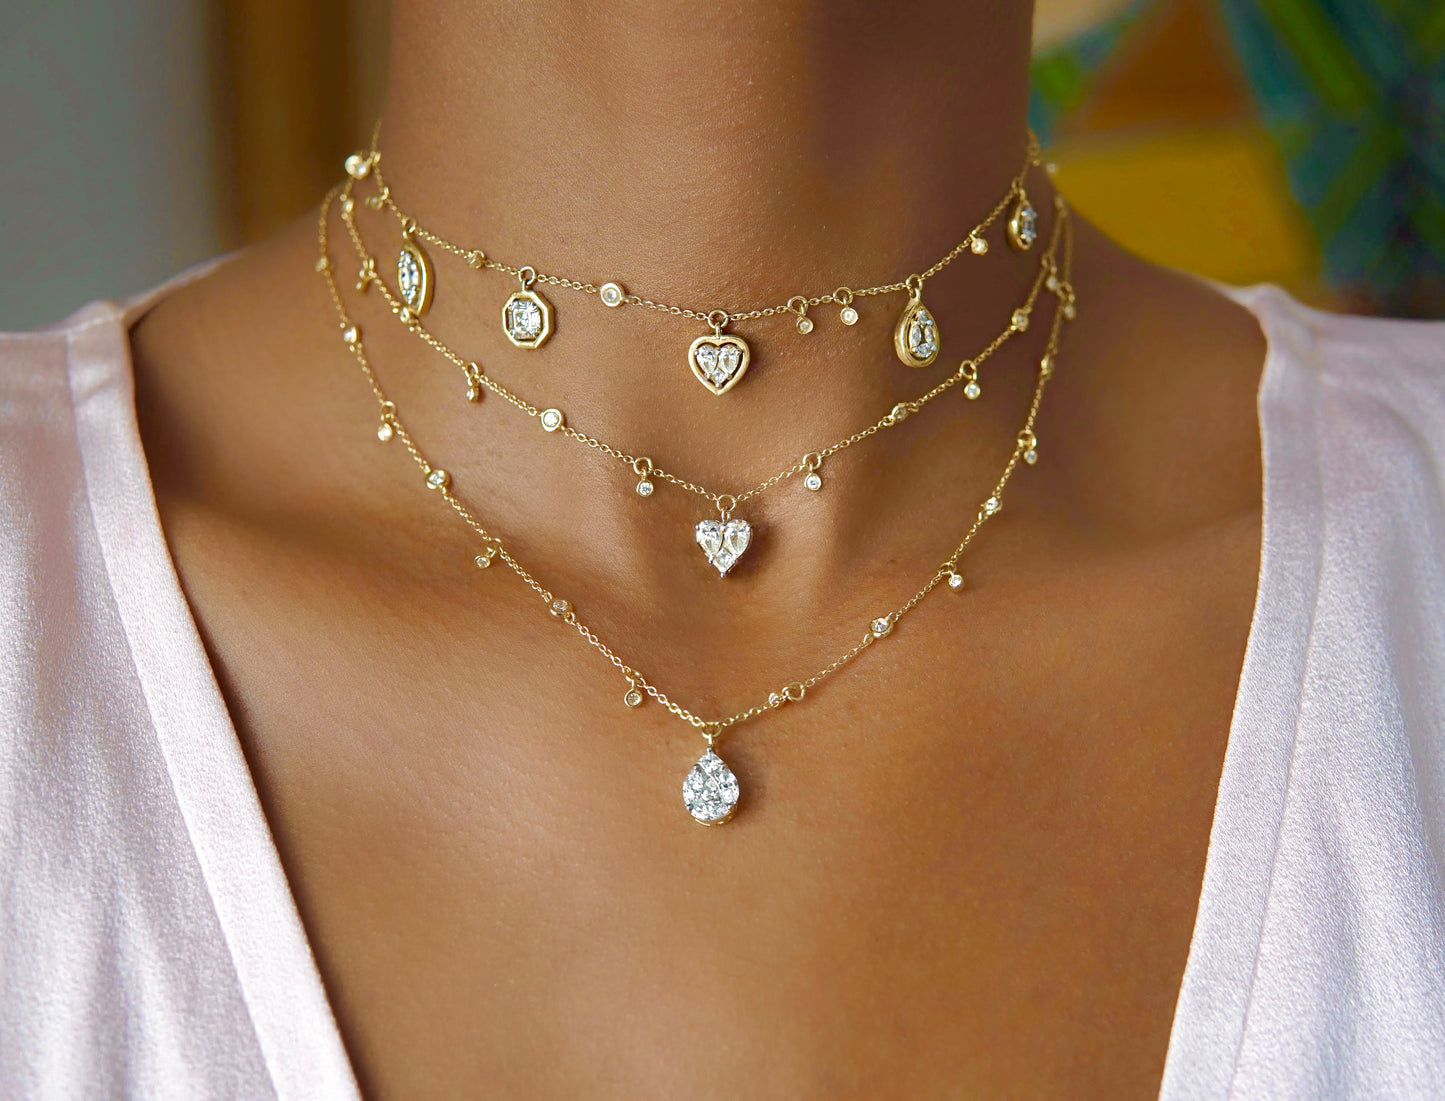 Catena Illusion Pear Shaped Charm Necklace